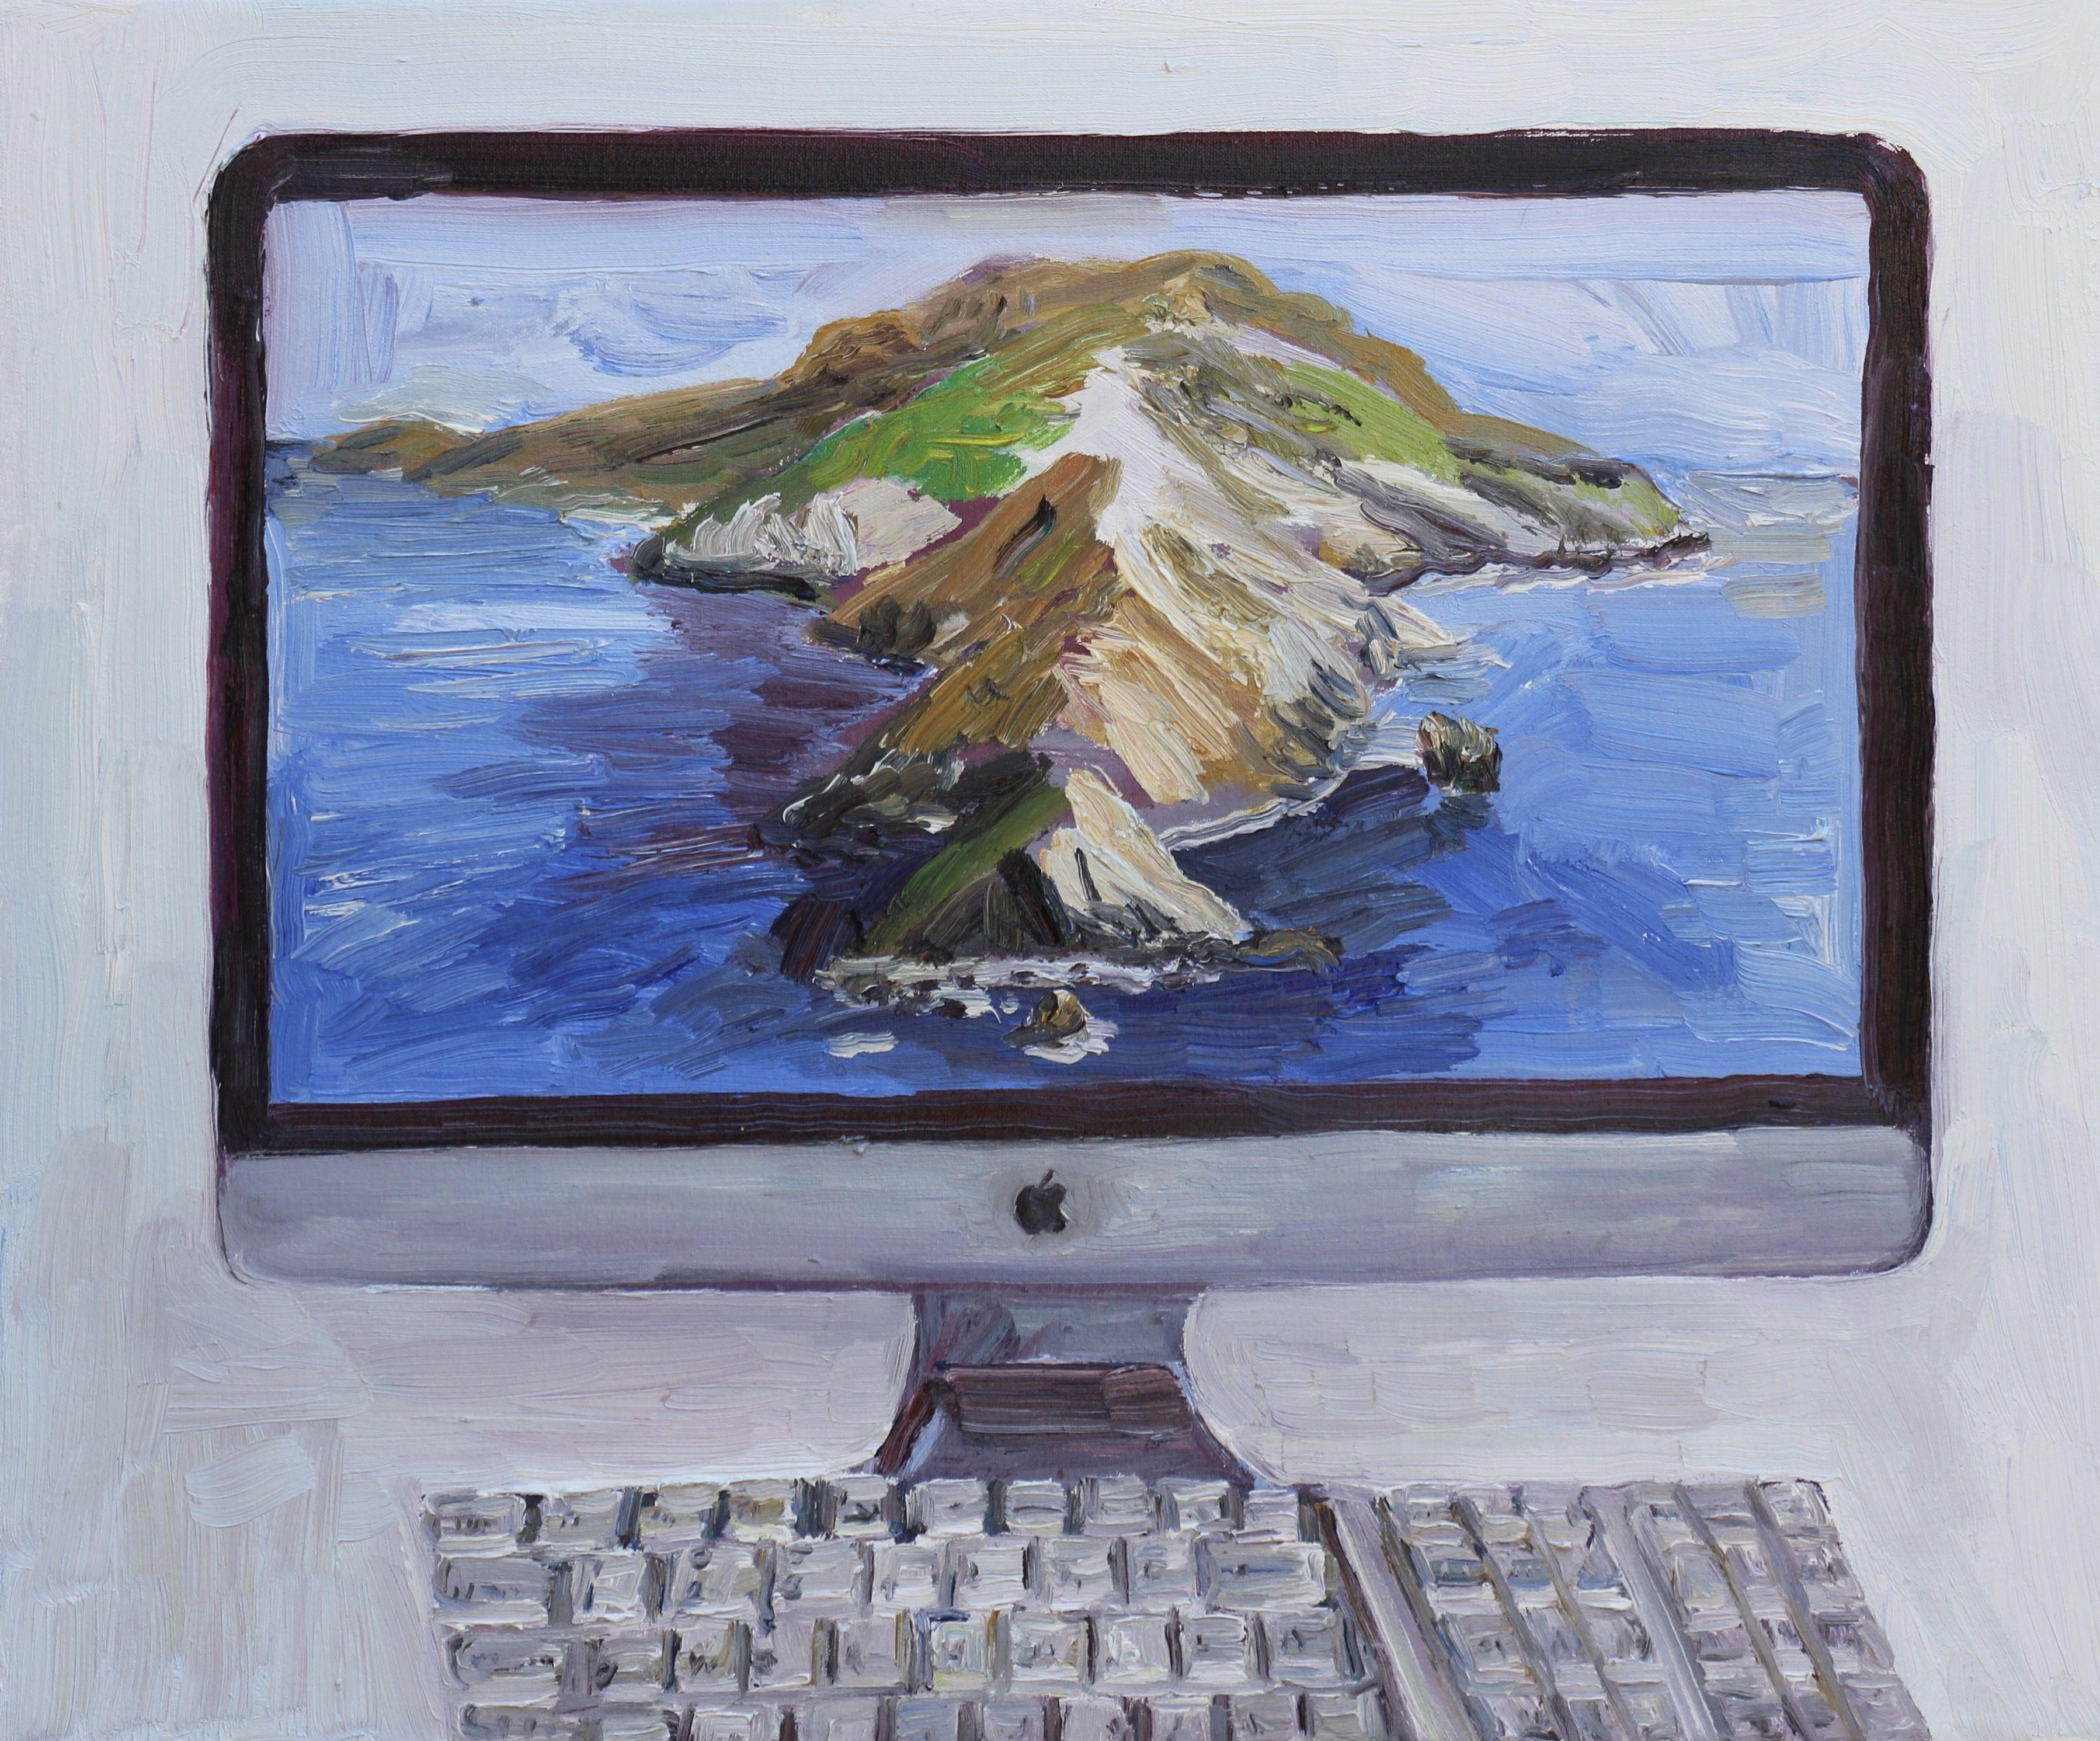 John Kilduff Still-Life Painting - Imac computer with Catalina Island on the screen, Painting, Oil on Canvas